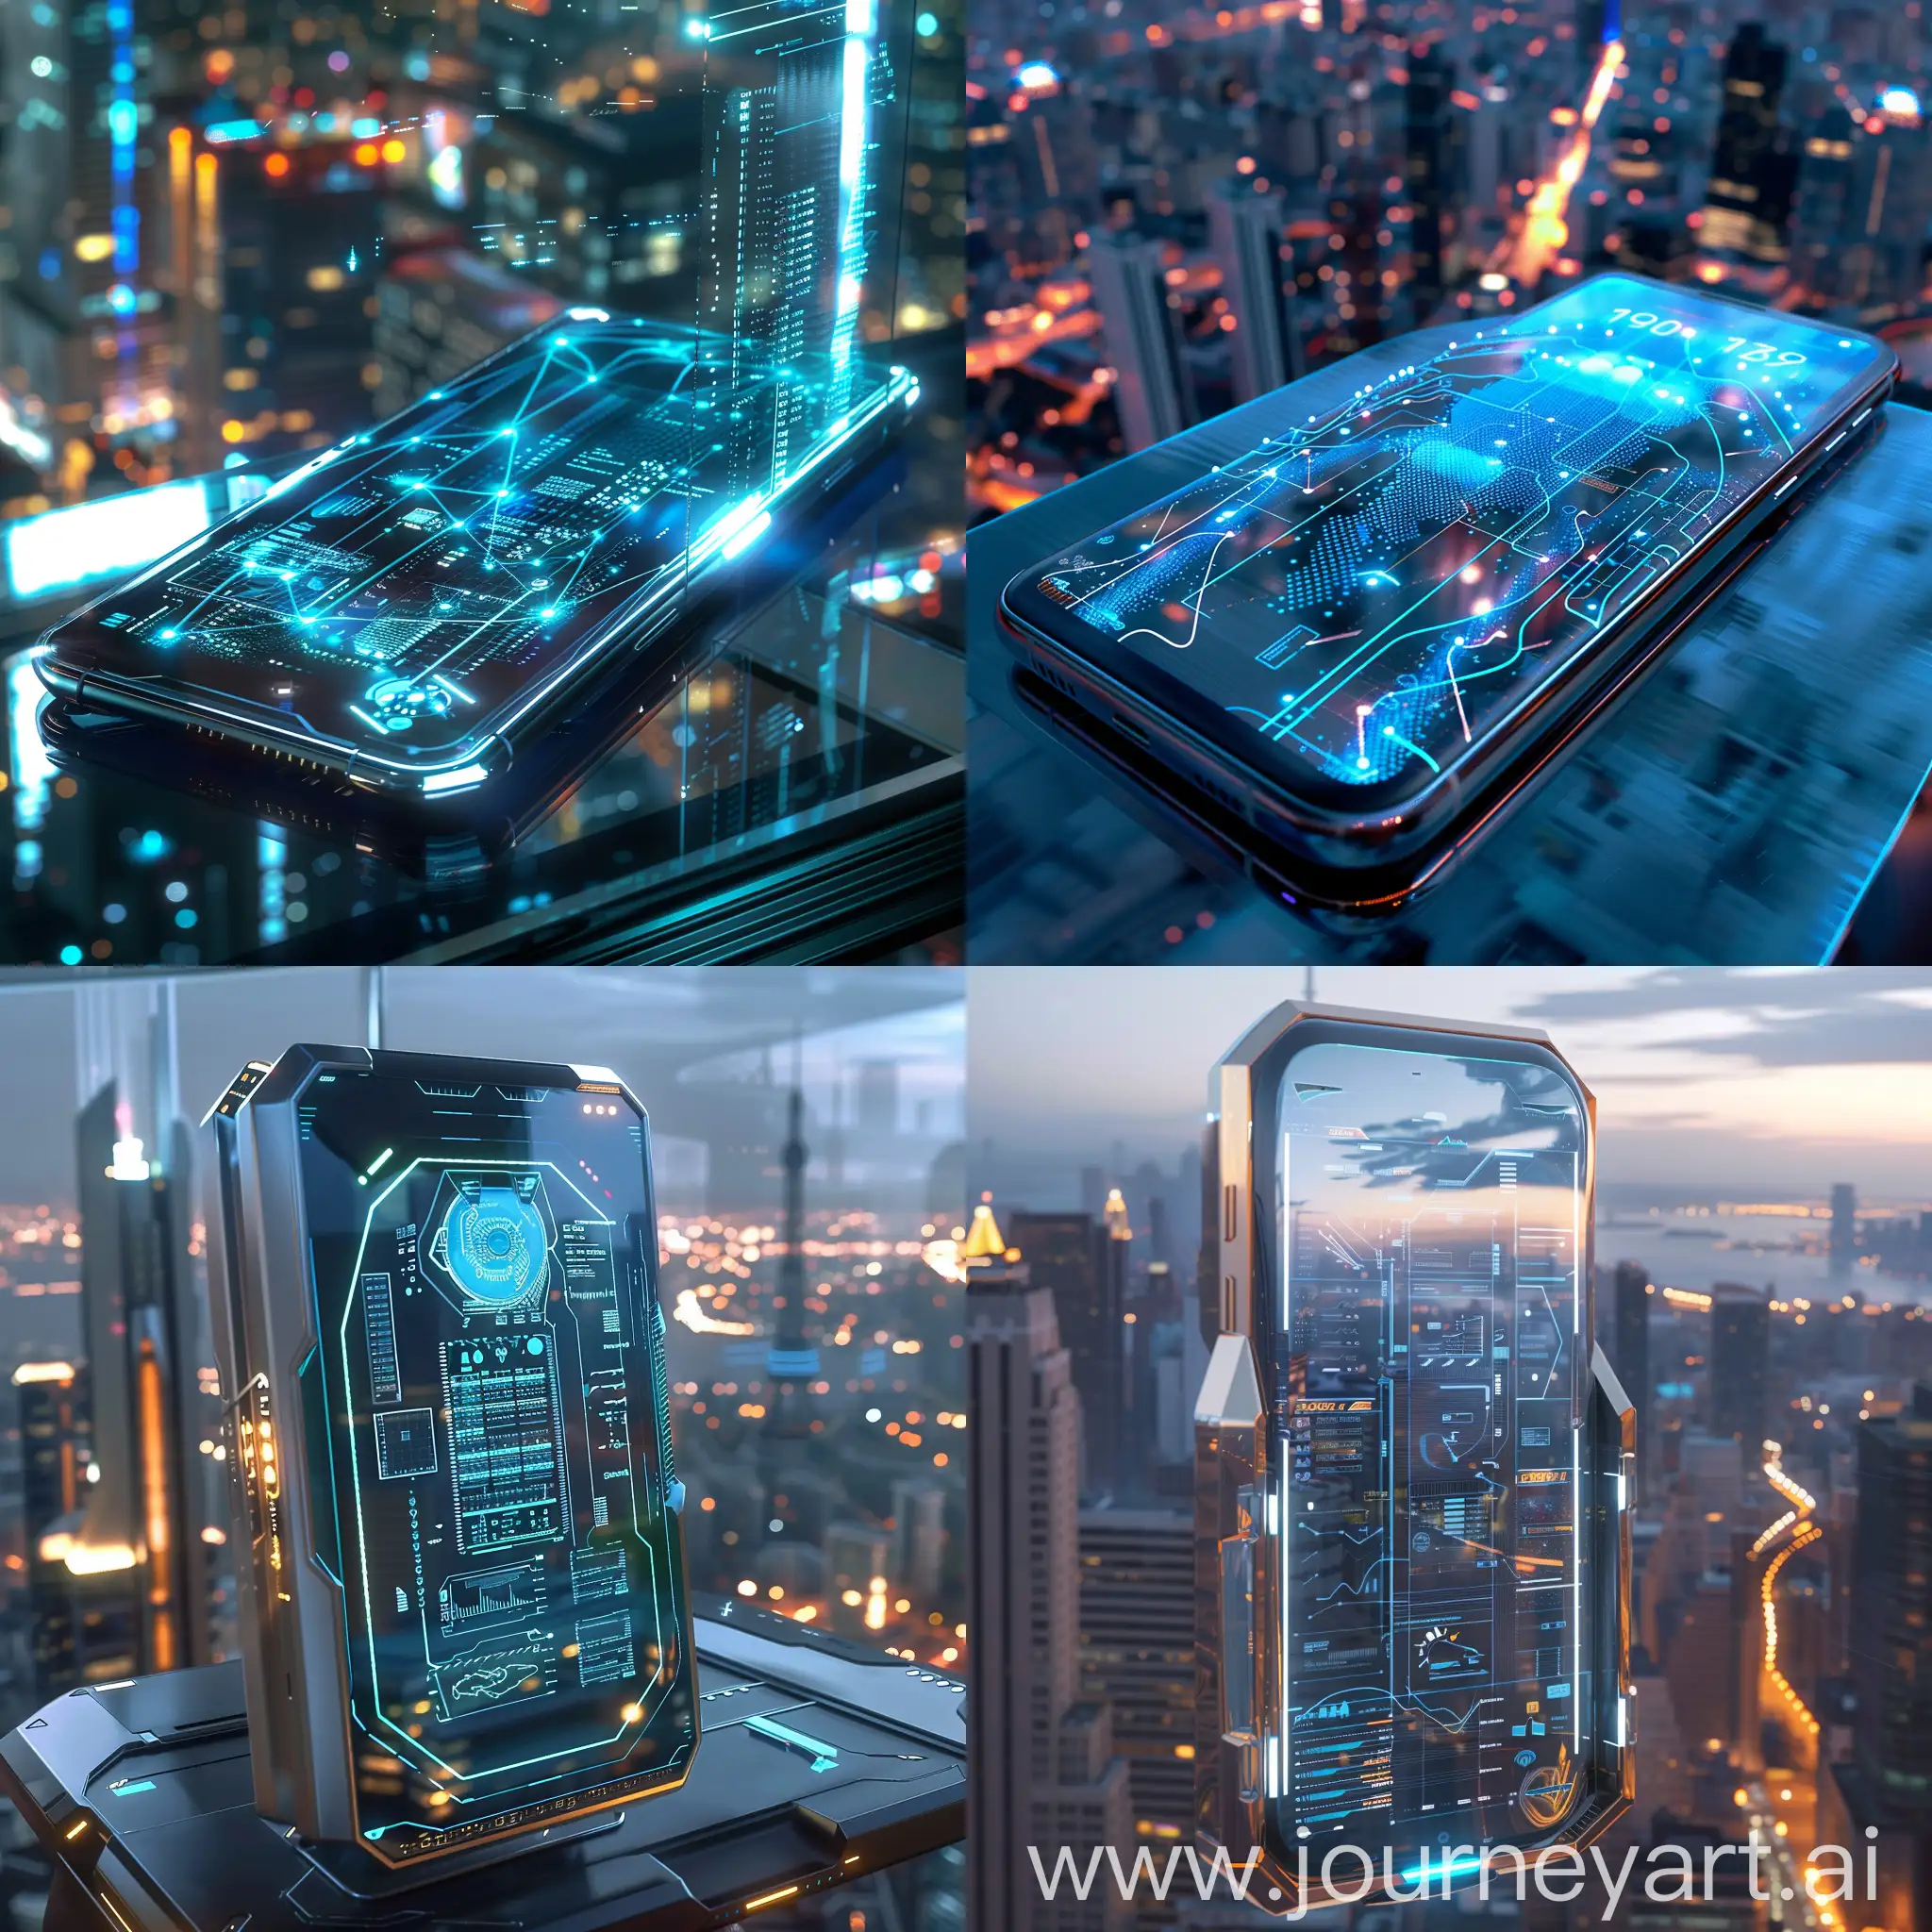 Futuristic-Smartphone-with-Holographic-Display-in-Urban-Dusk-Scene